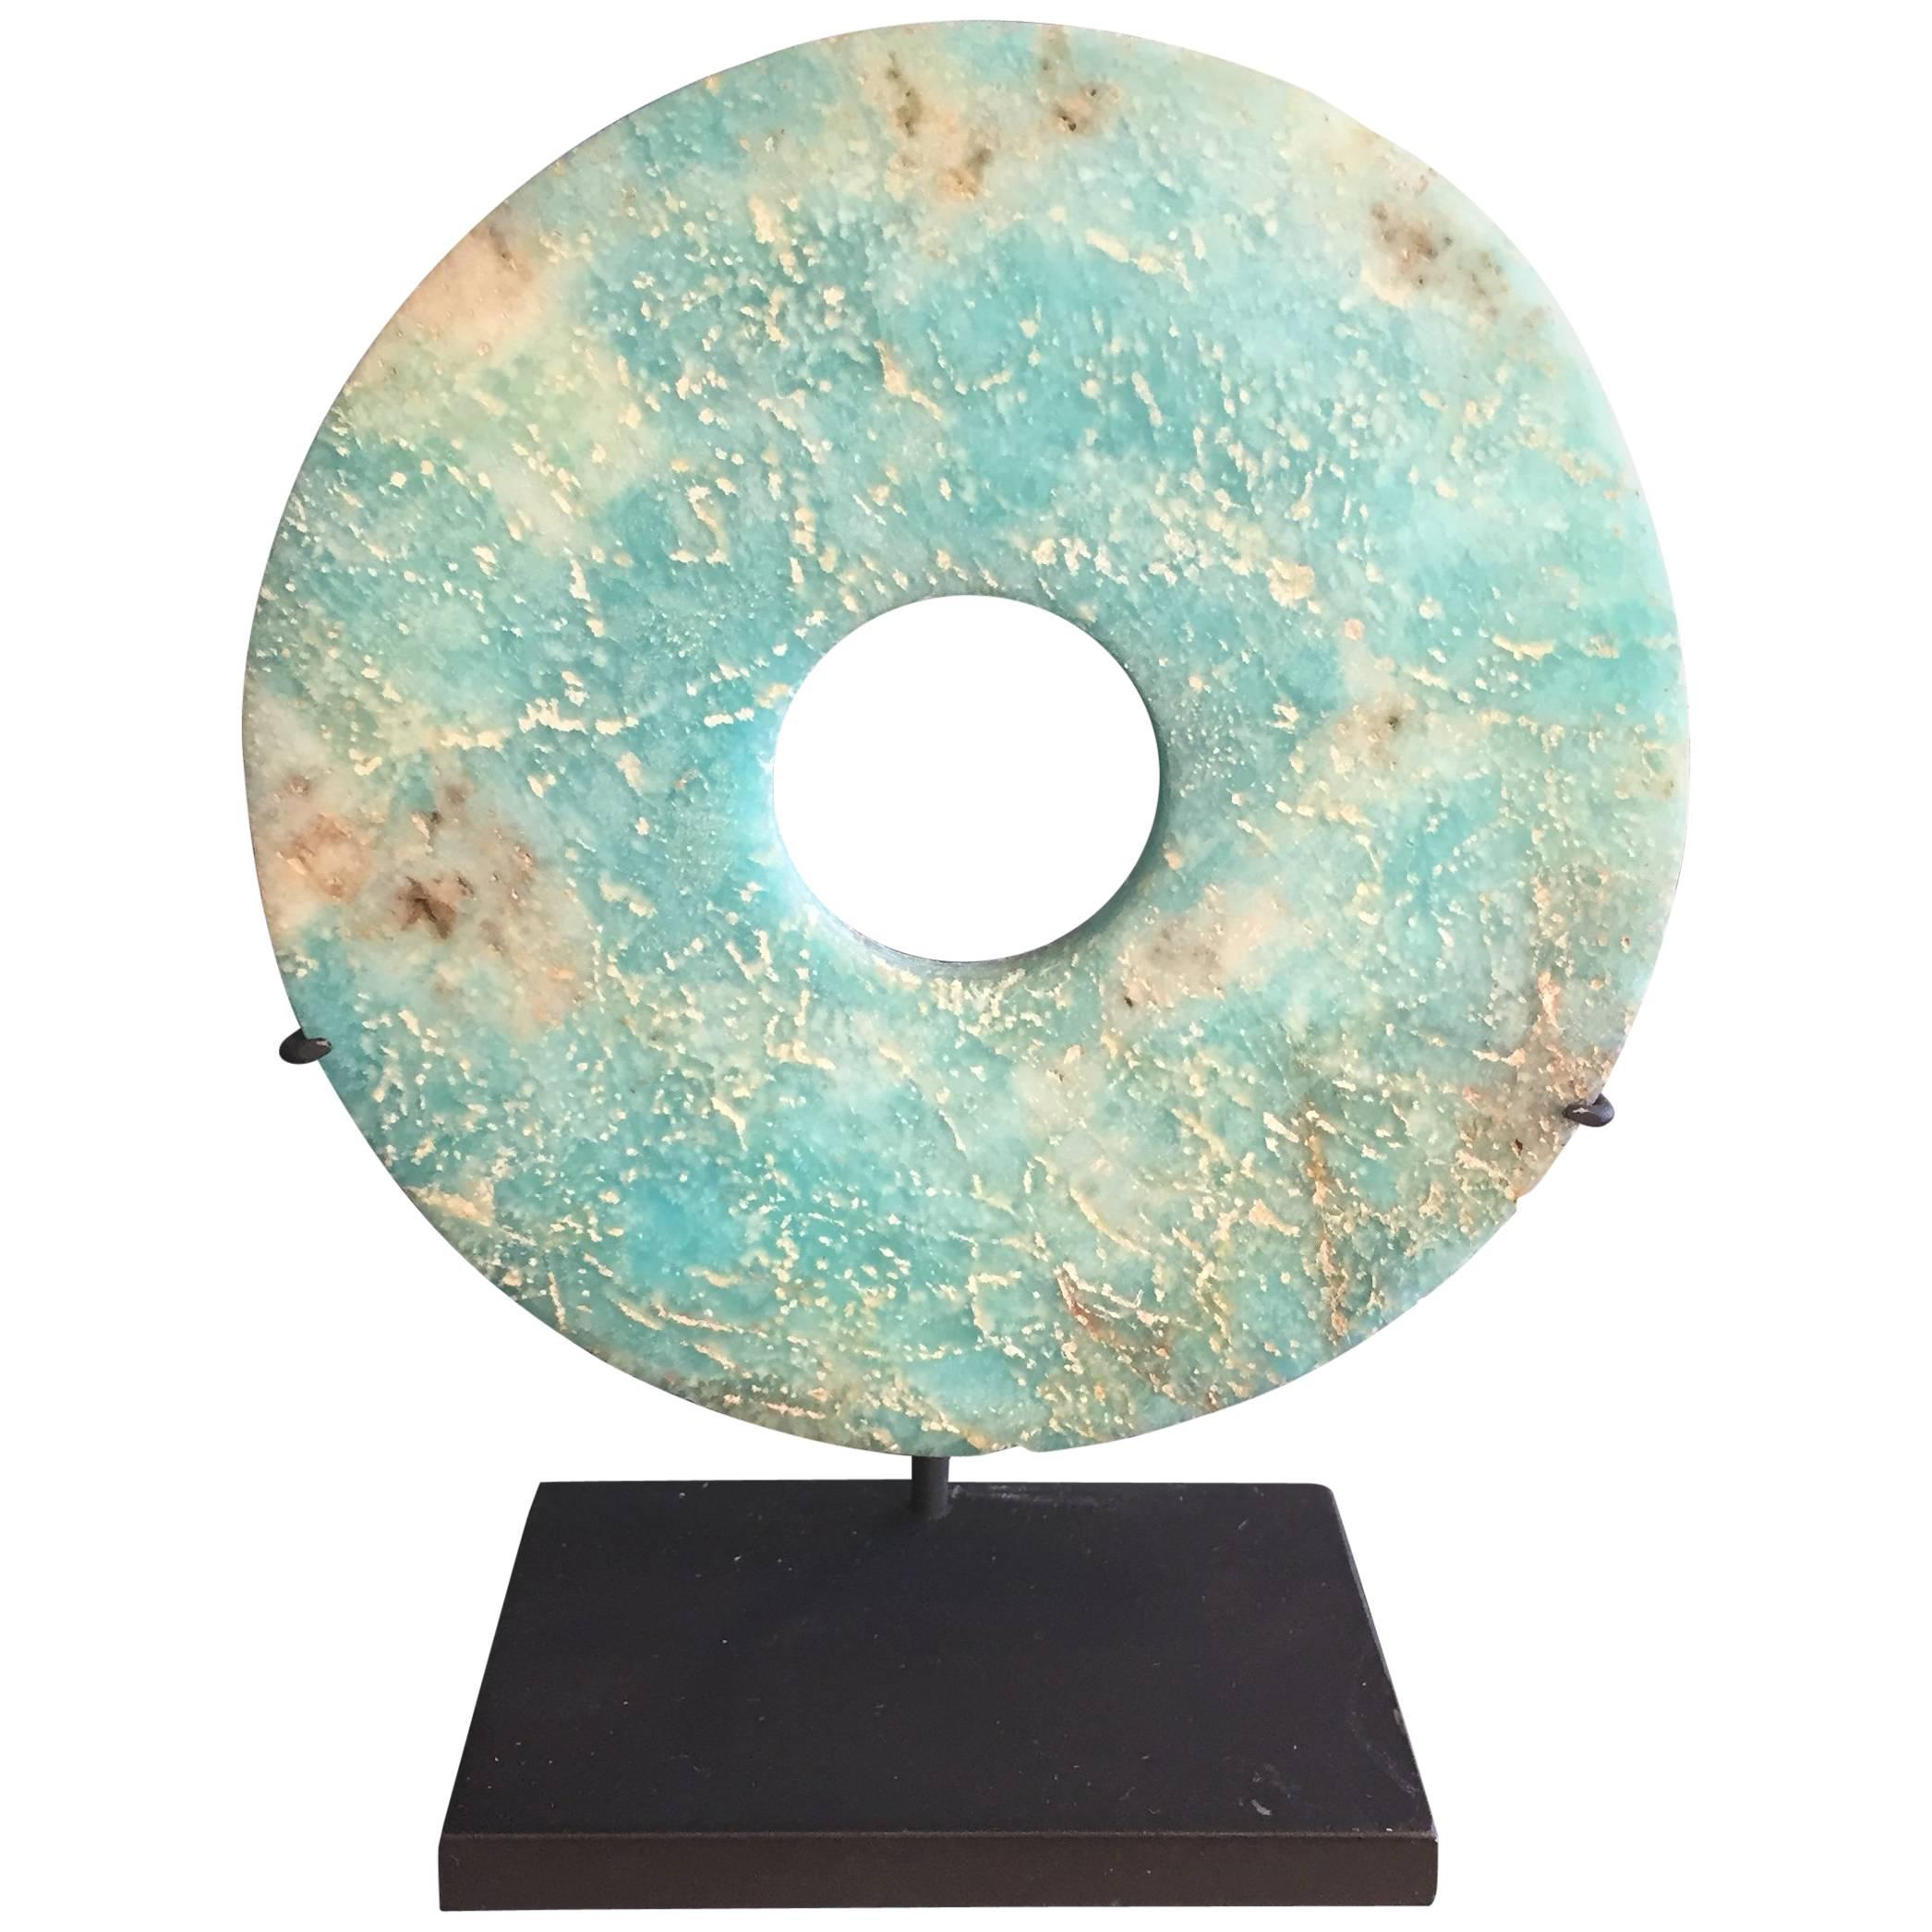 China Ancient Hand-Carved Blue Bi Disc from Qijia Culture, 2000 BC